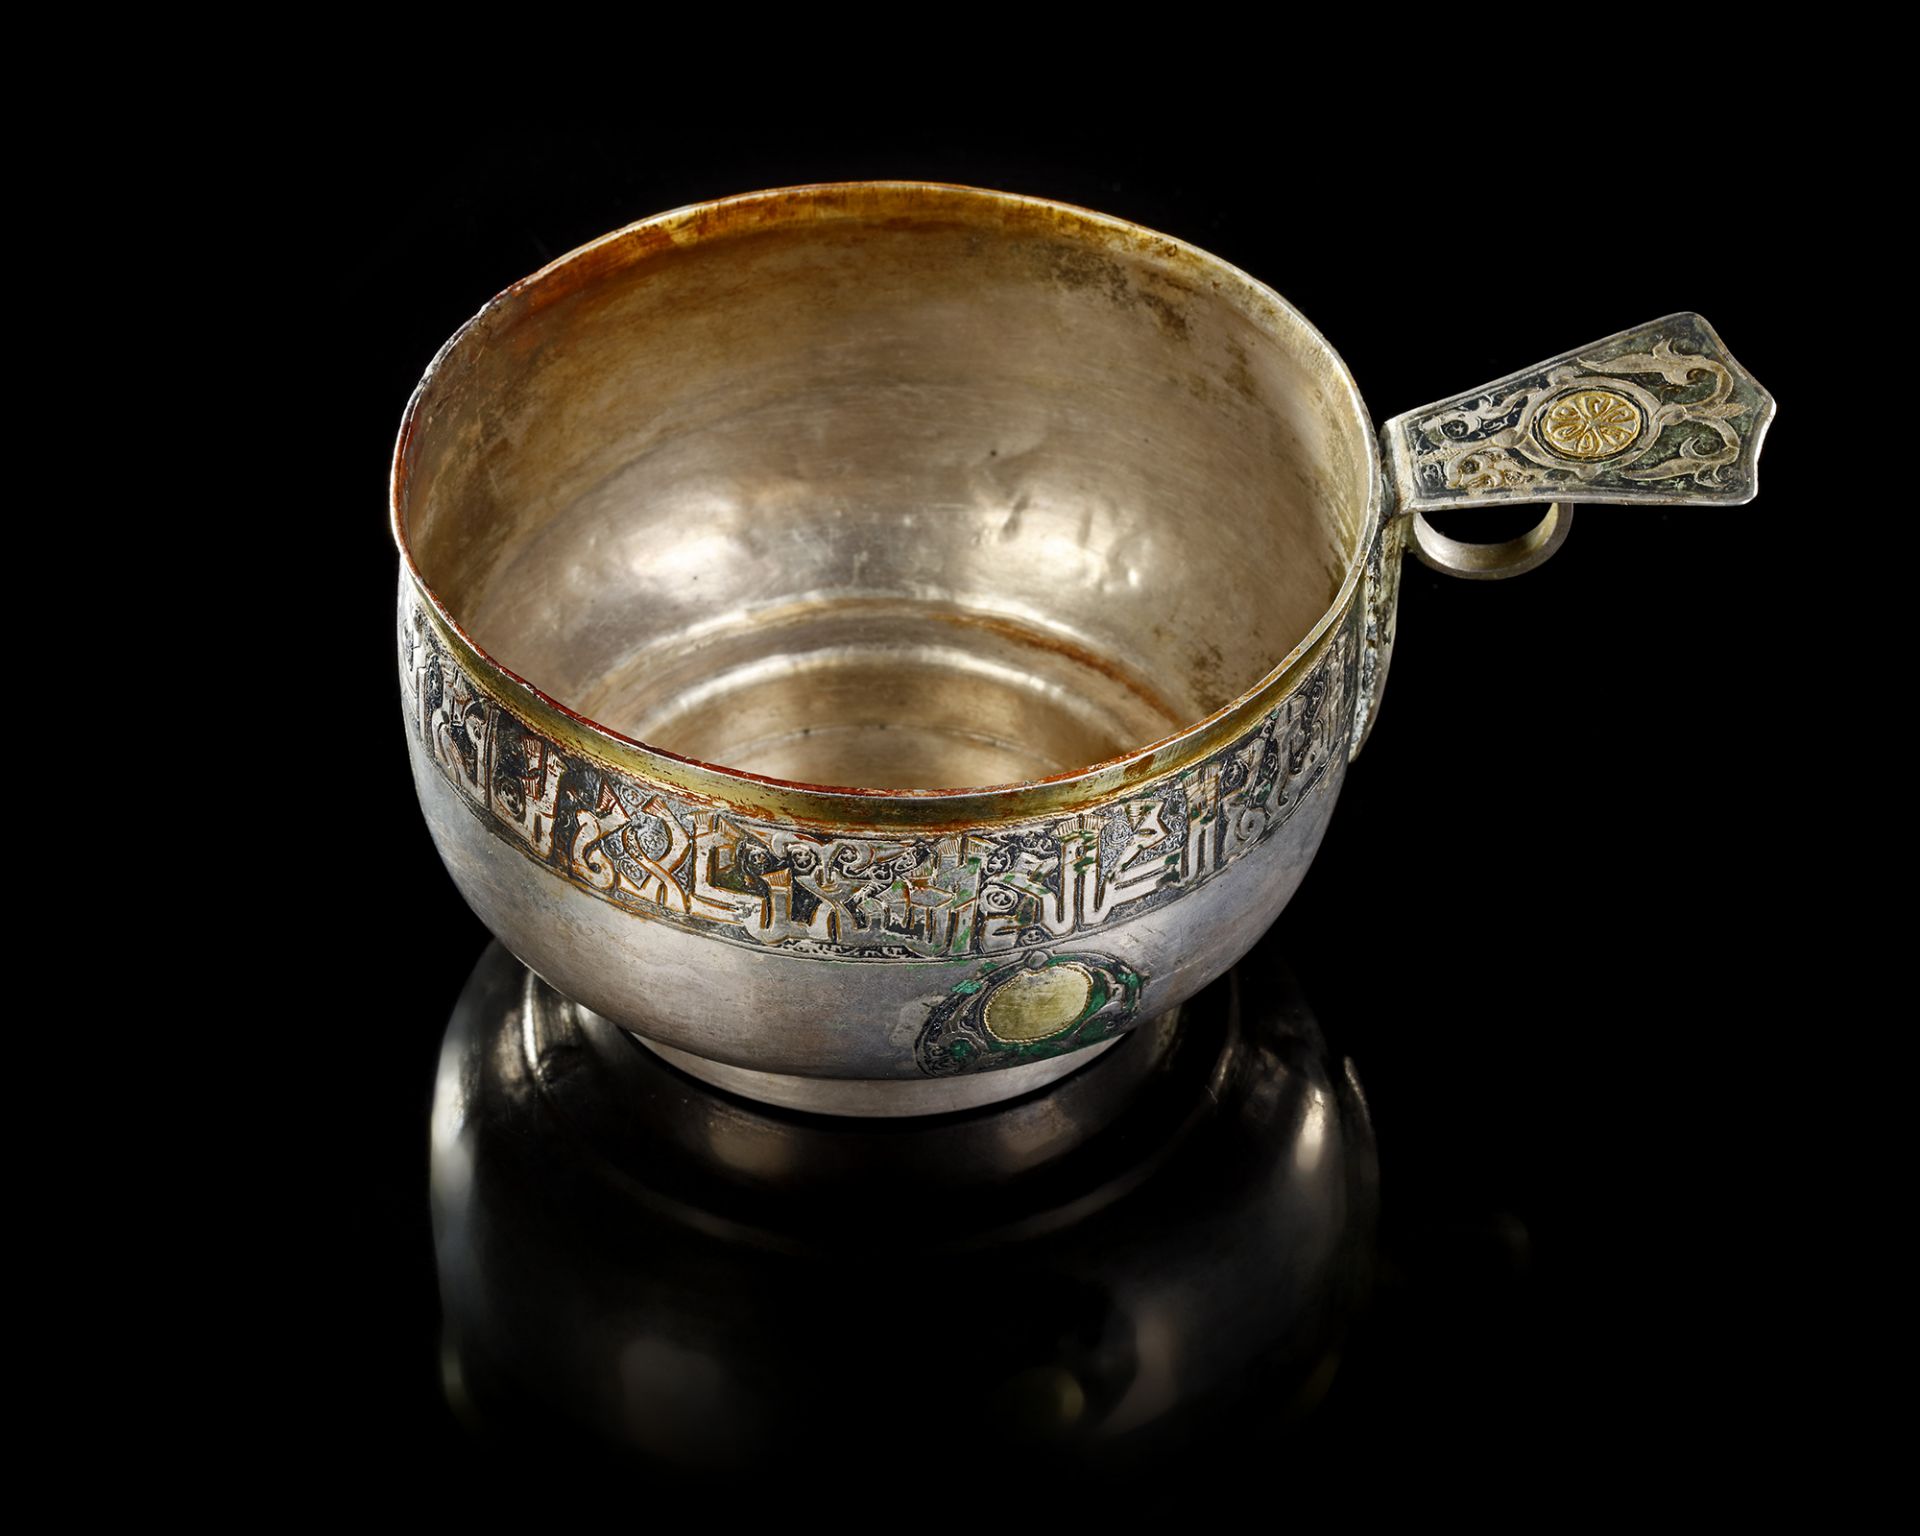 A RARE SILVER AND NIELLOED CUP WITH KUFIC INSCRIPTION, PERSIA OR CENTRAL ASIA, 11TH-12TH CENTURY - Image 3 of 34